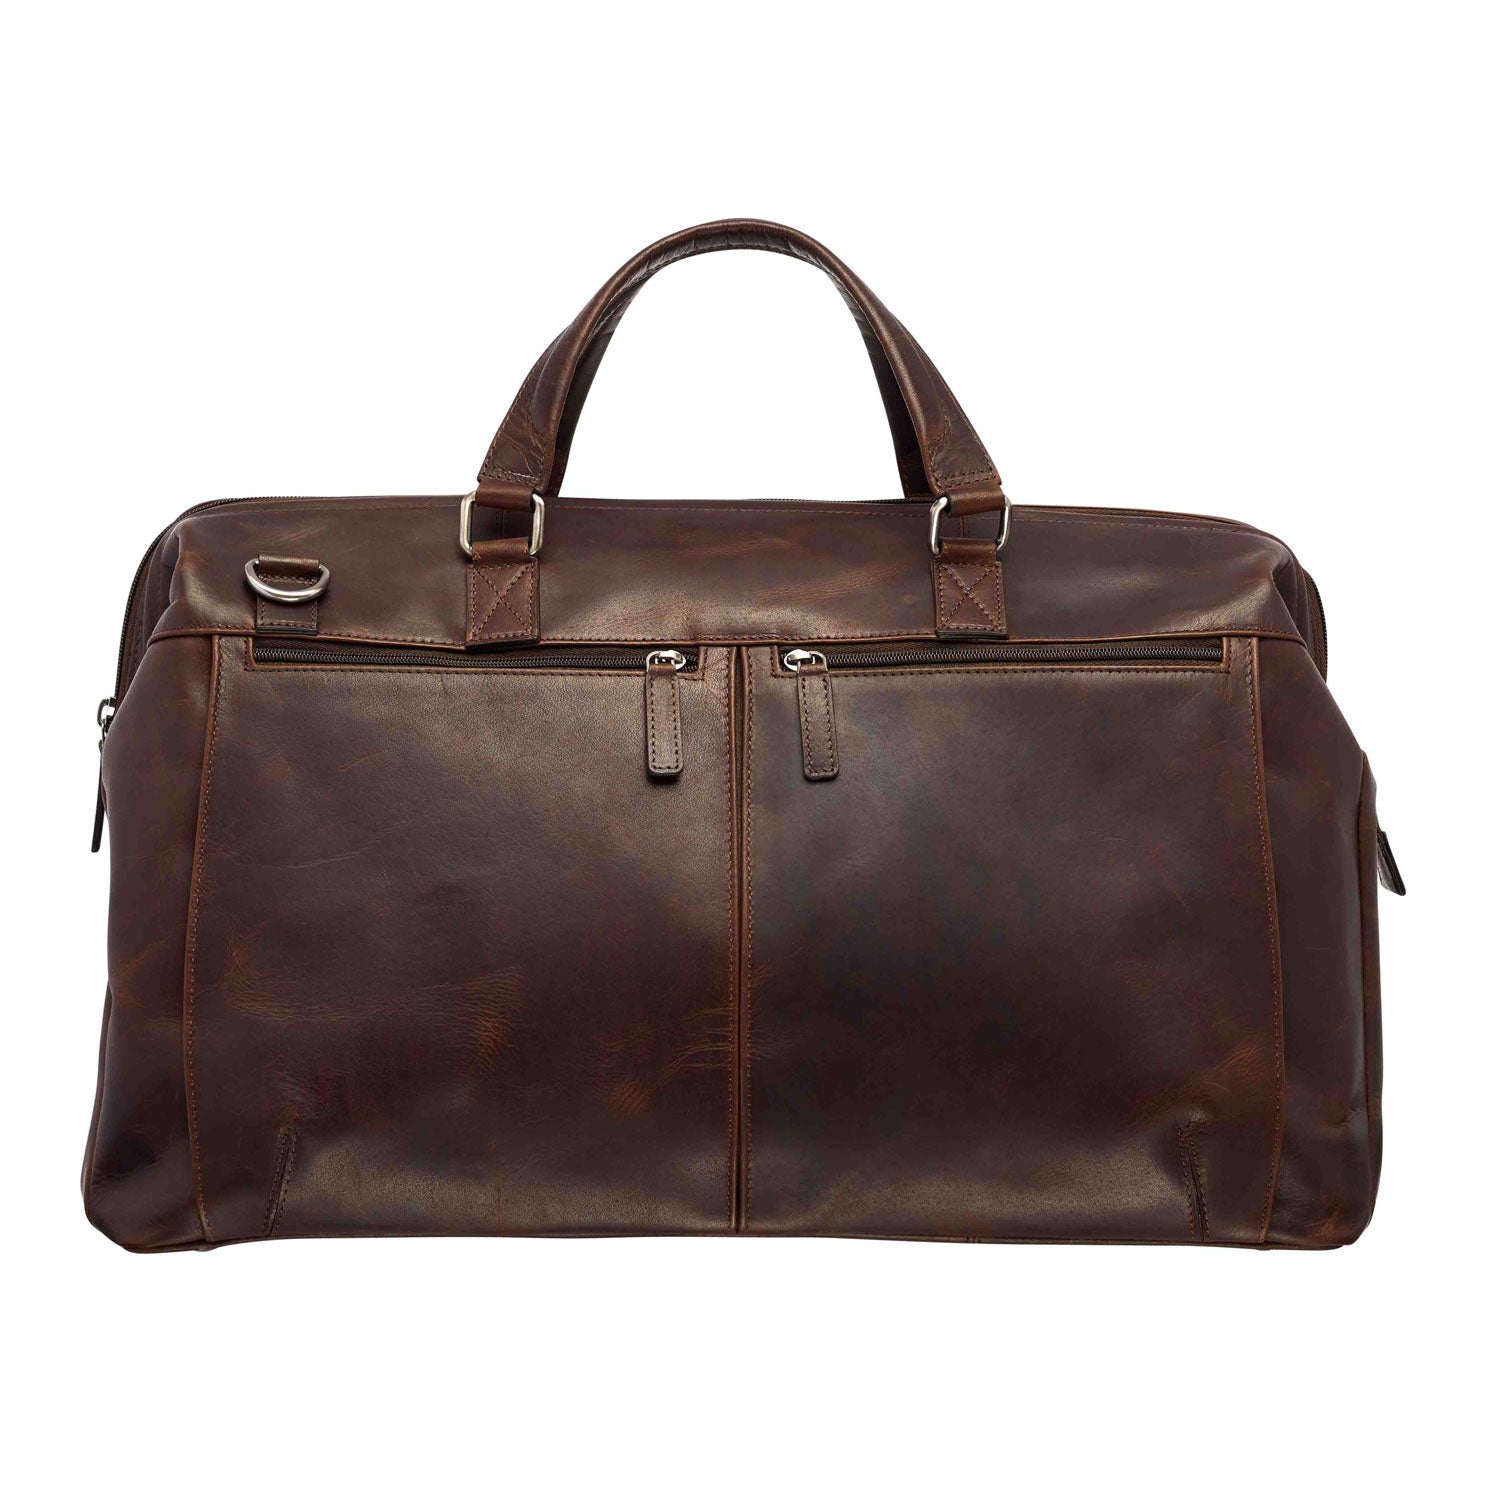 Mancini Leather Classic Carry-on Duffle Bag, 20" x 10" x 13.5", Brown